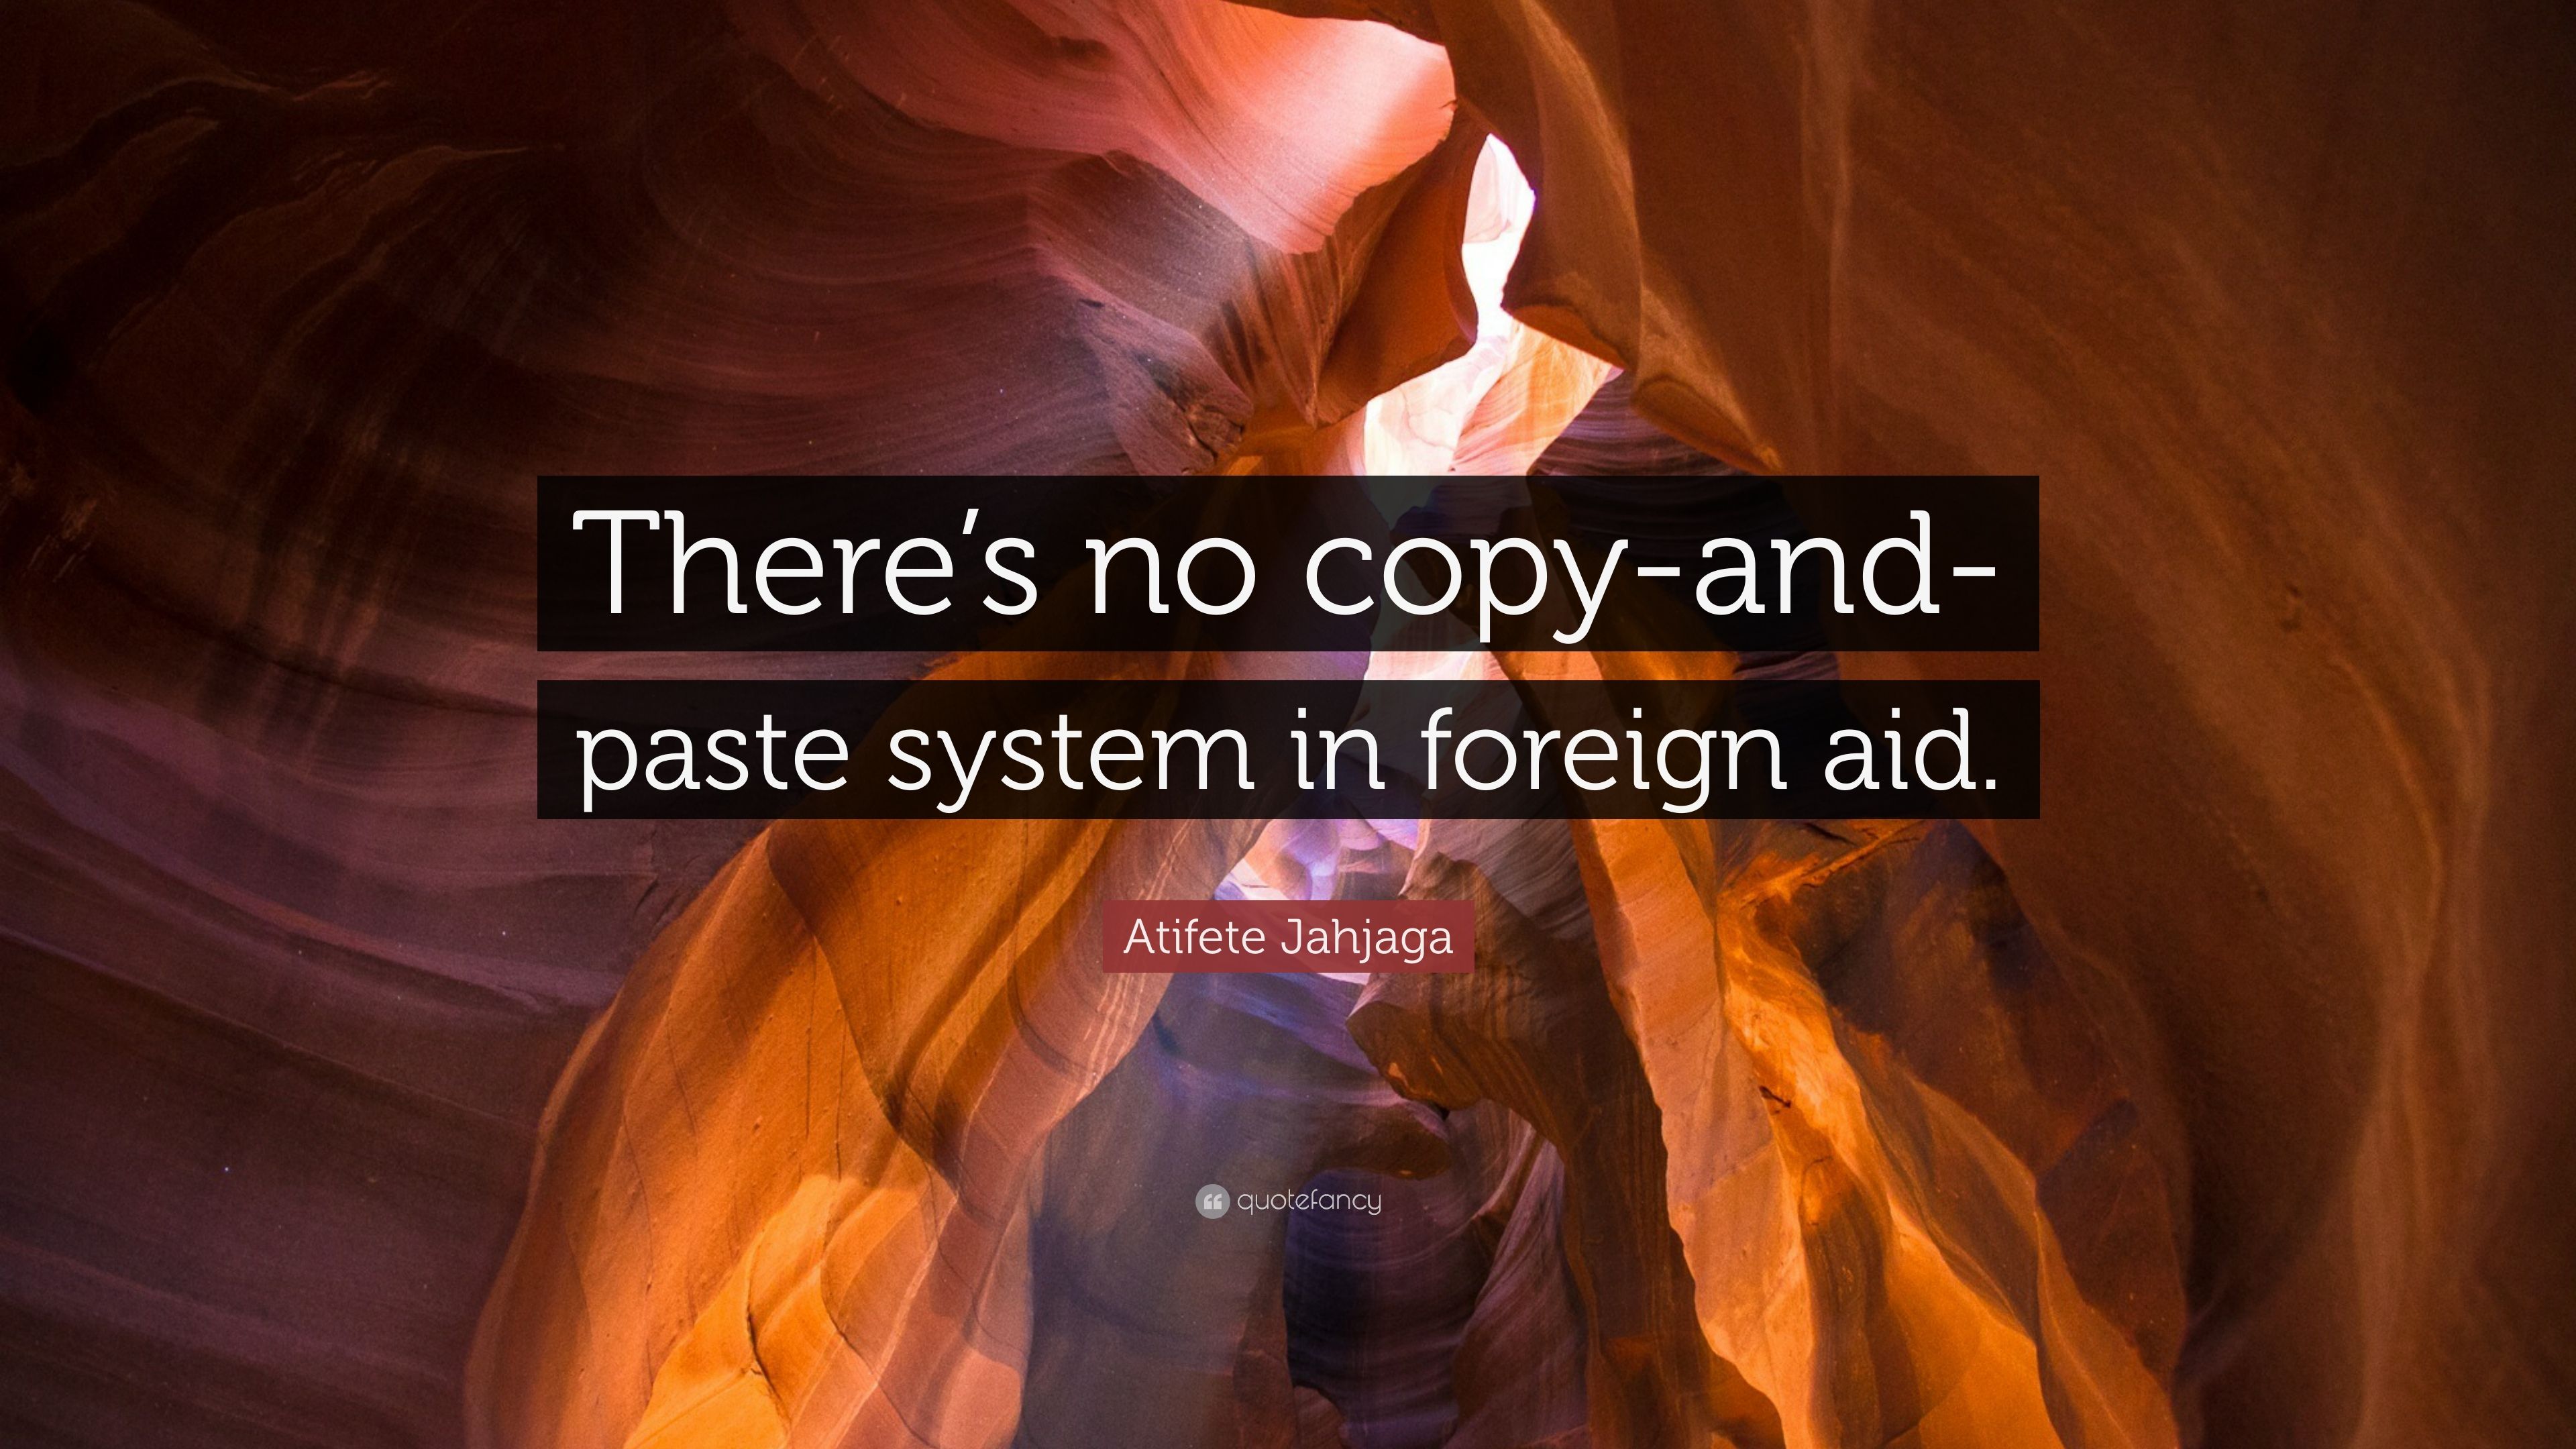 Atifete Jahjaga Quote: “There's No Copy And Paste System In Foreign Aid.” (7 Wallpaper)